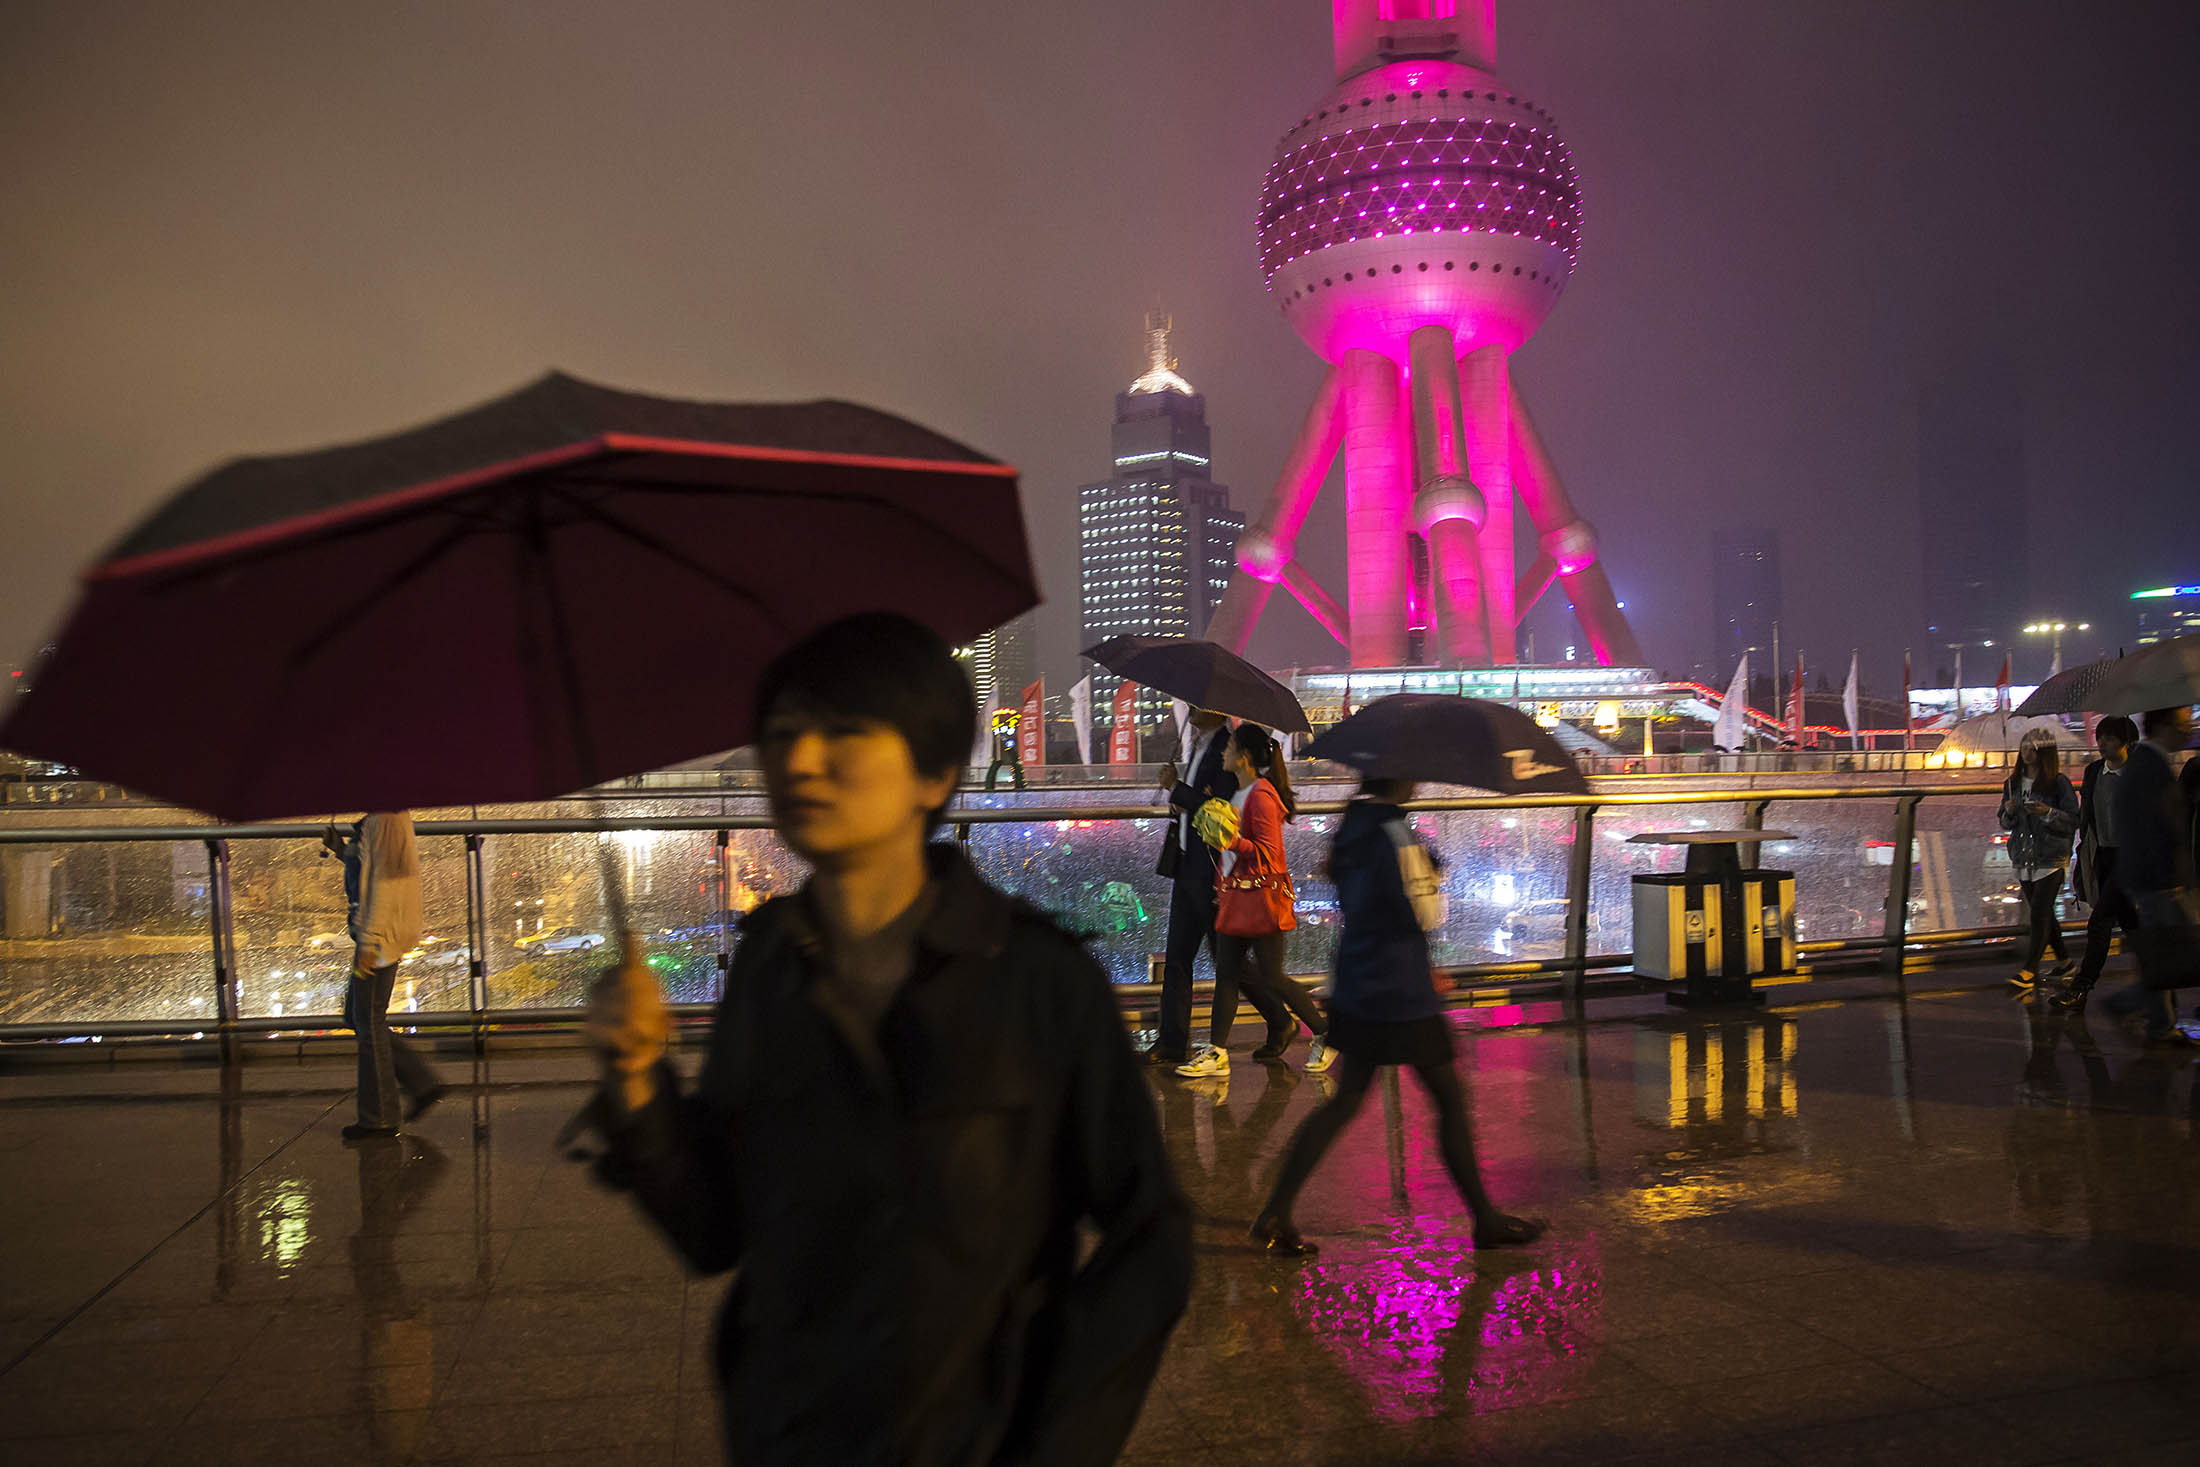 Pedestrians holding umbrellas walk as the Oriental Pearl Tower, right, stands illuminated at night in the Lujiazui district of Shanghai.
